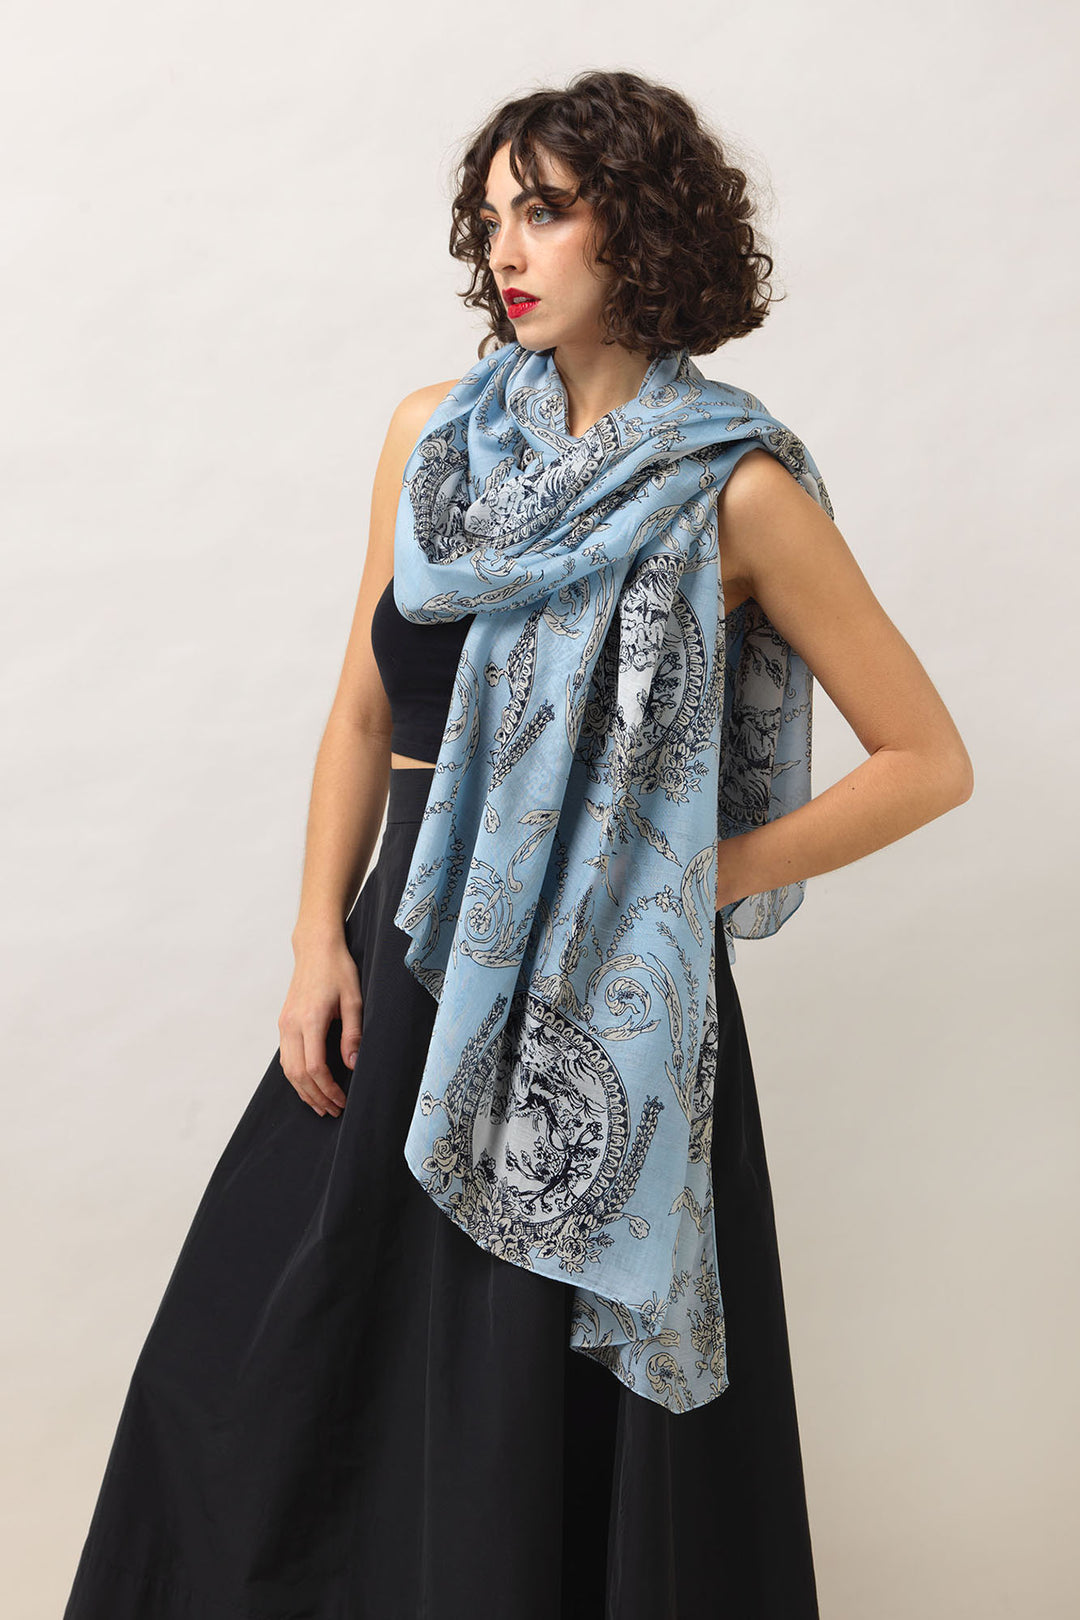 Women's accessories, gifts for her. Large scarf in sky blue with valentine floral print by One Hundred Stars